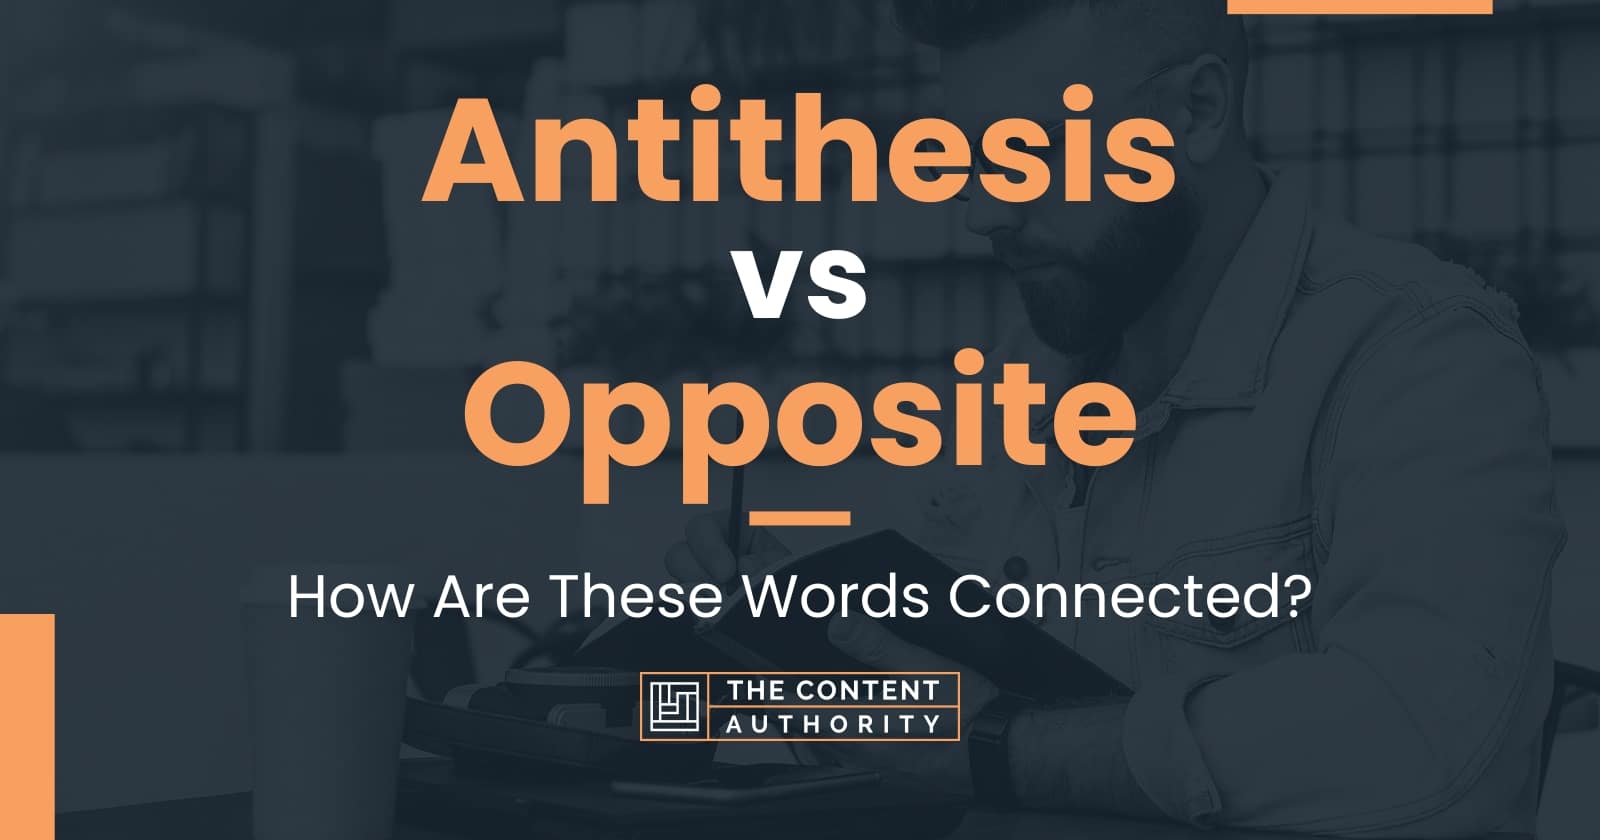 Antithesis vs Opposite: How Are These Words Connected?